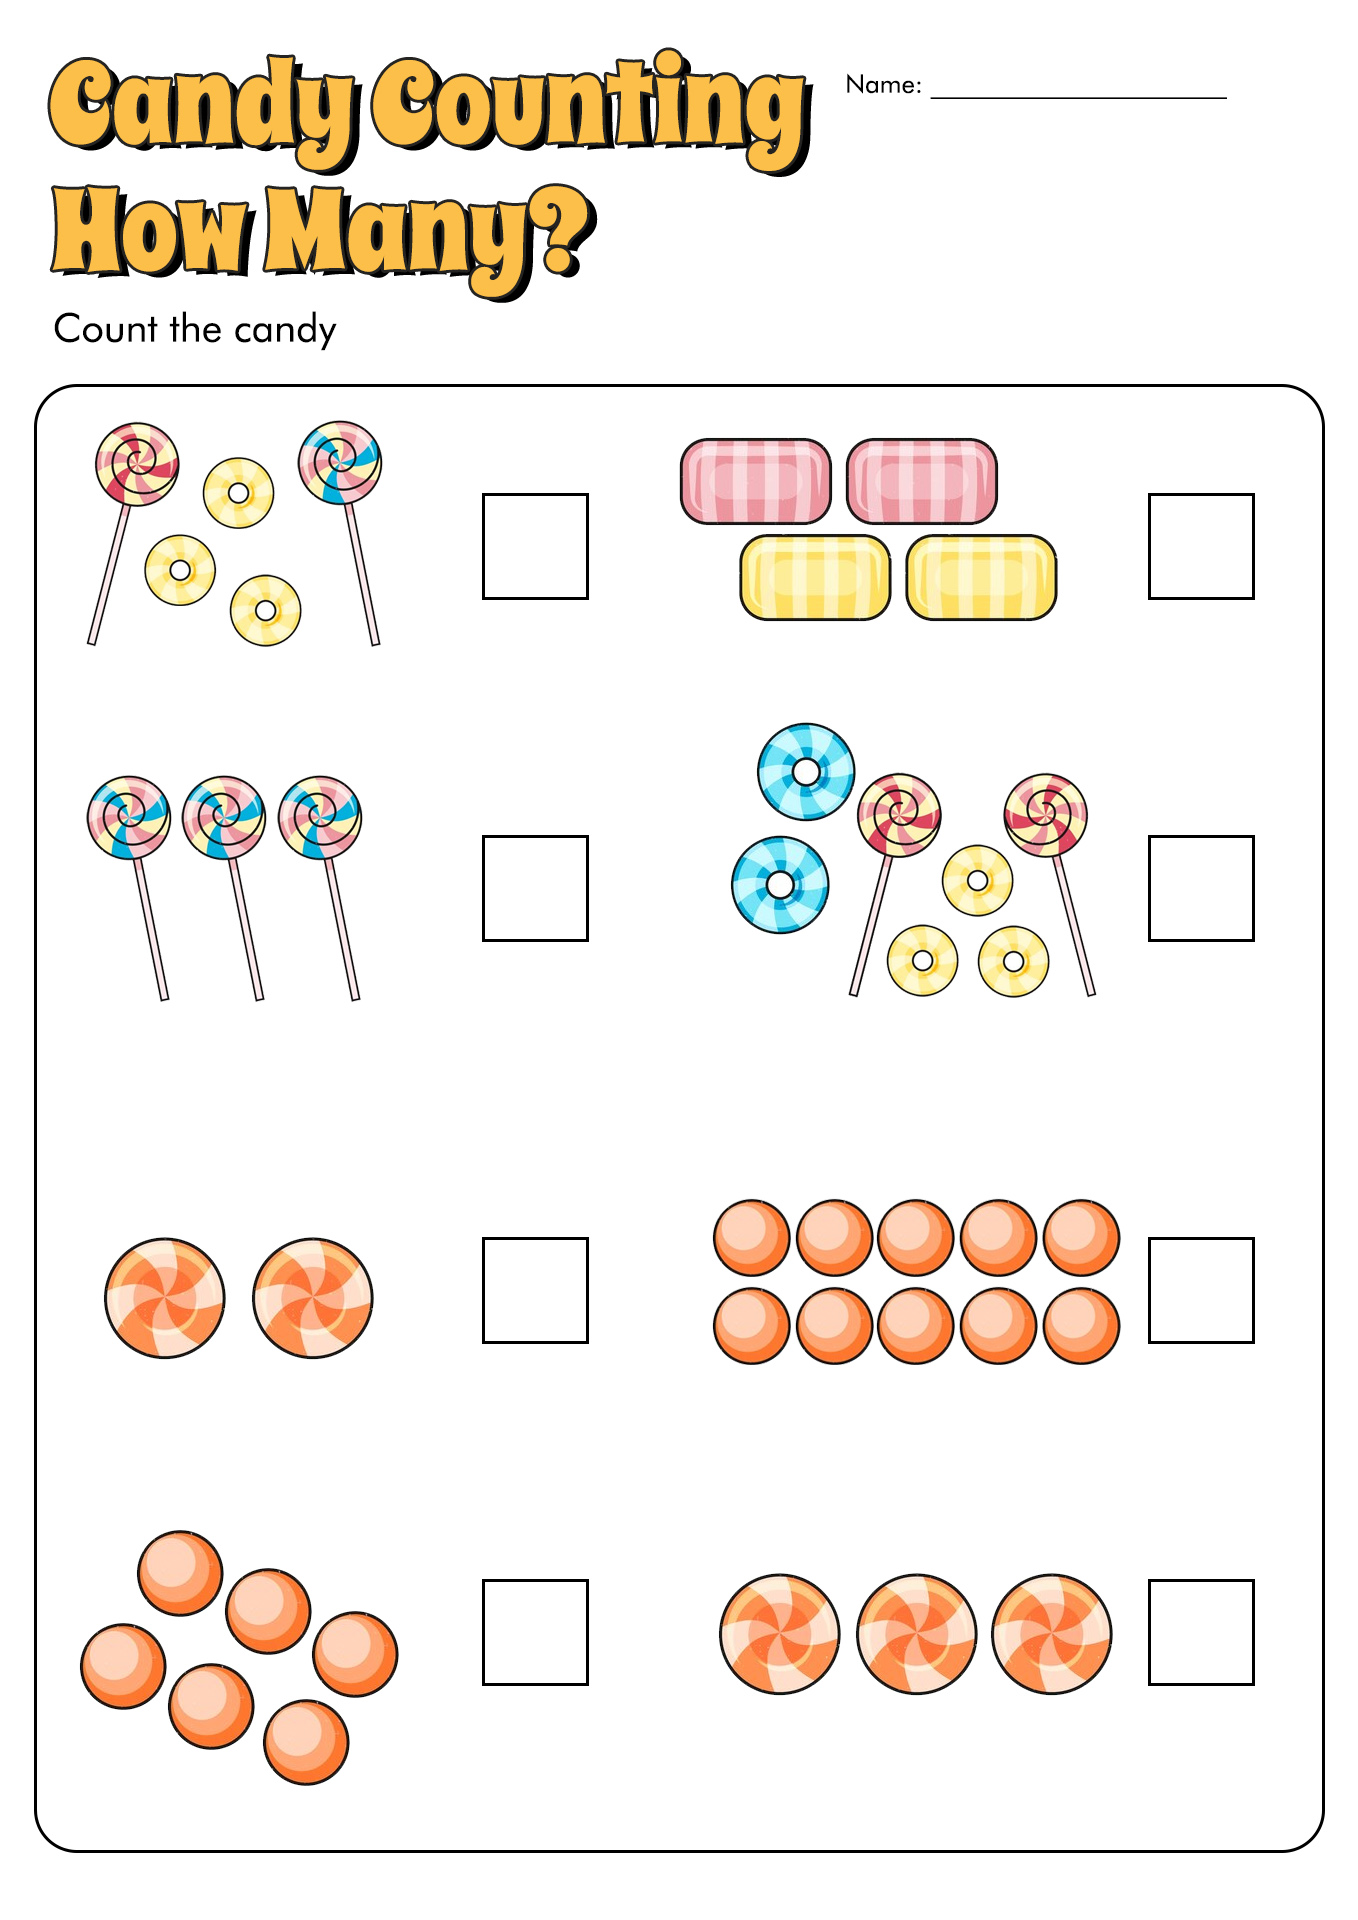 17-best-images-of-count-how-many-11-20-worksheets-how-many-counting